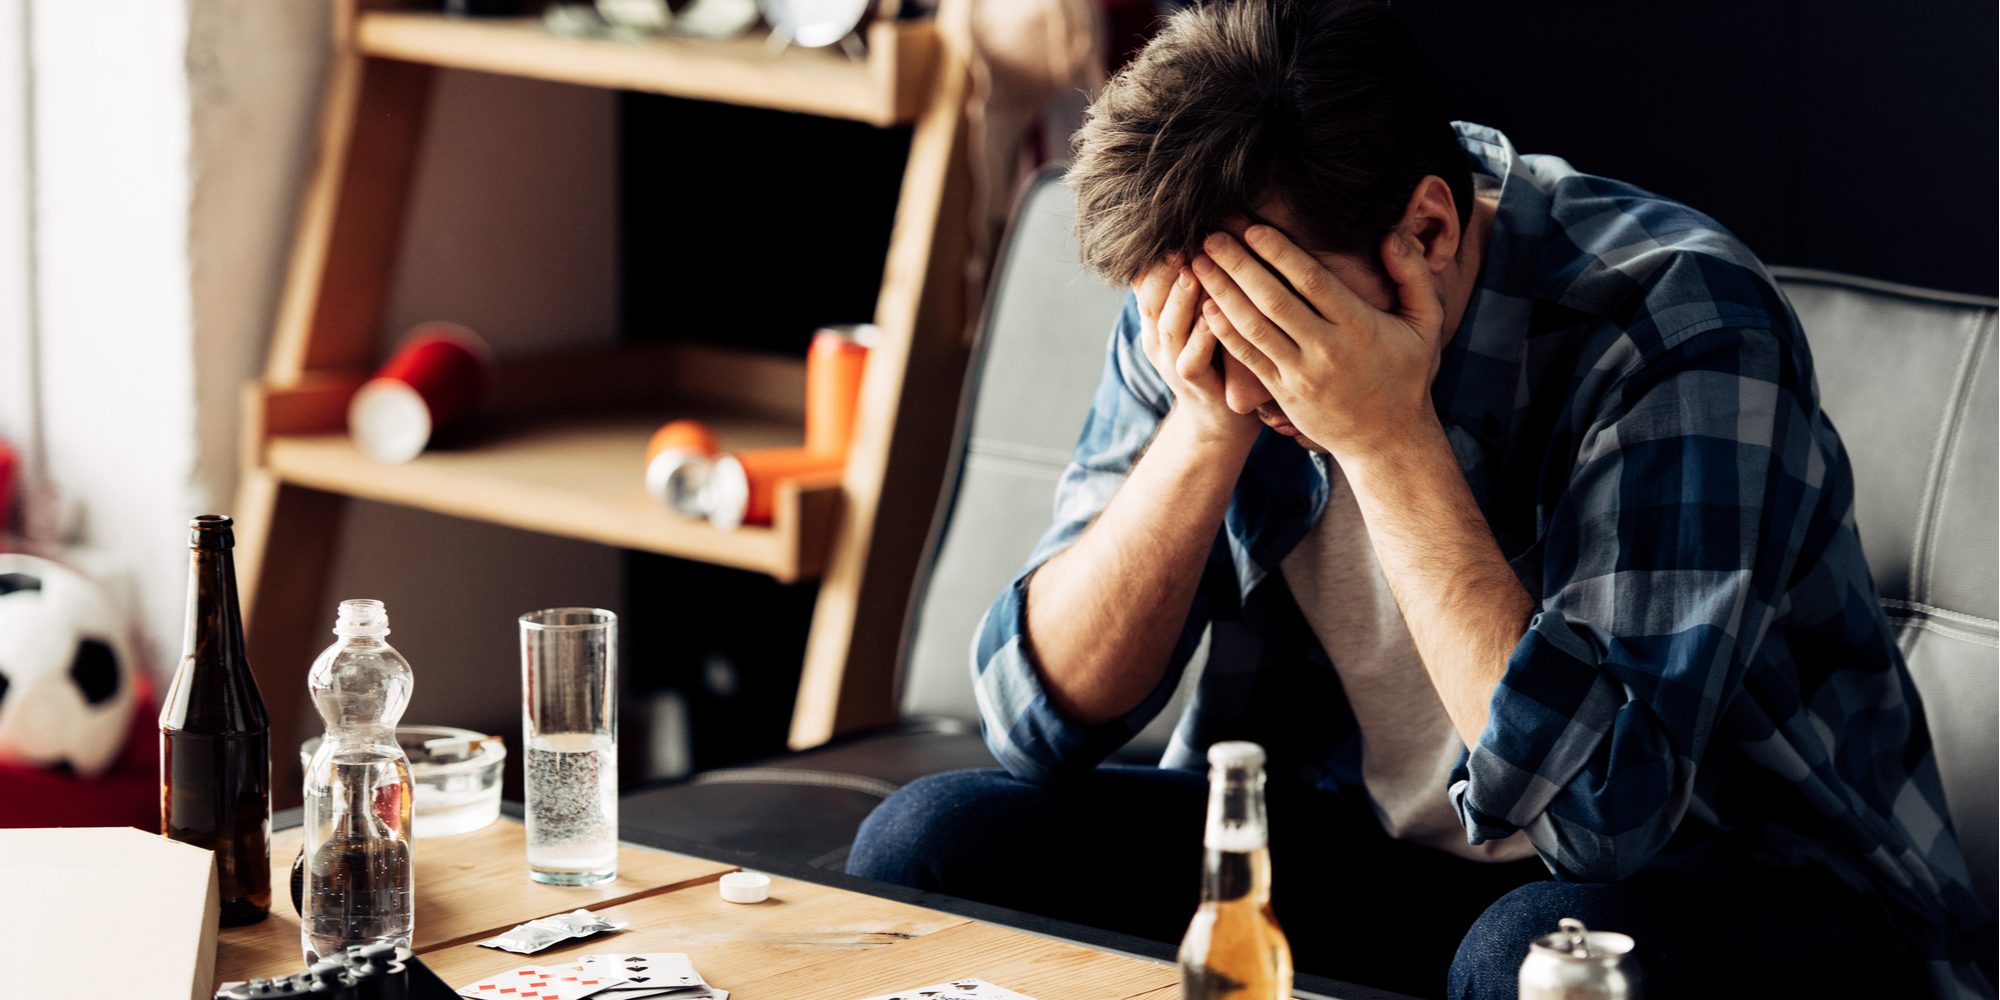 Is It a Hangover? Fever, Nausea, and Pain After Alcohol